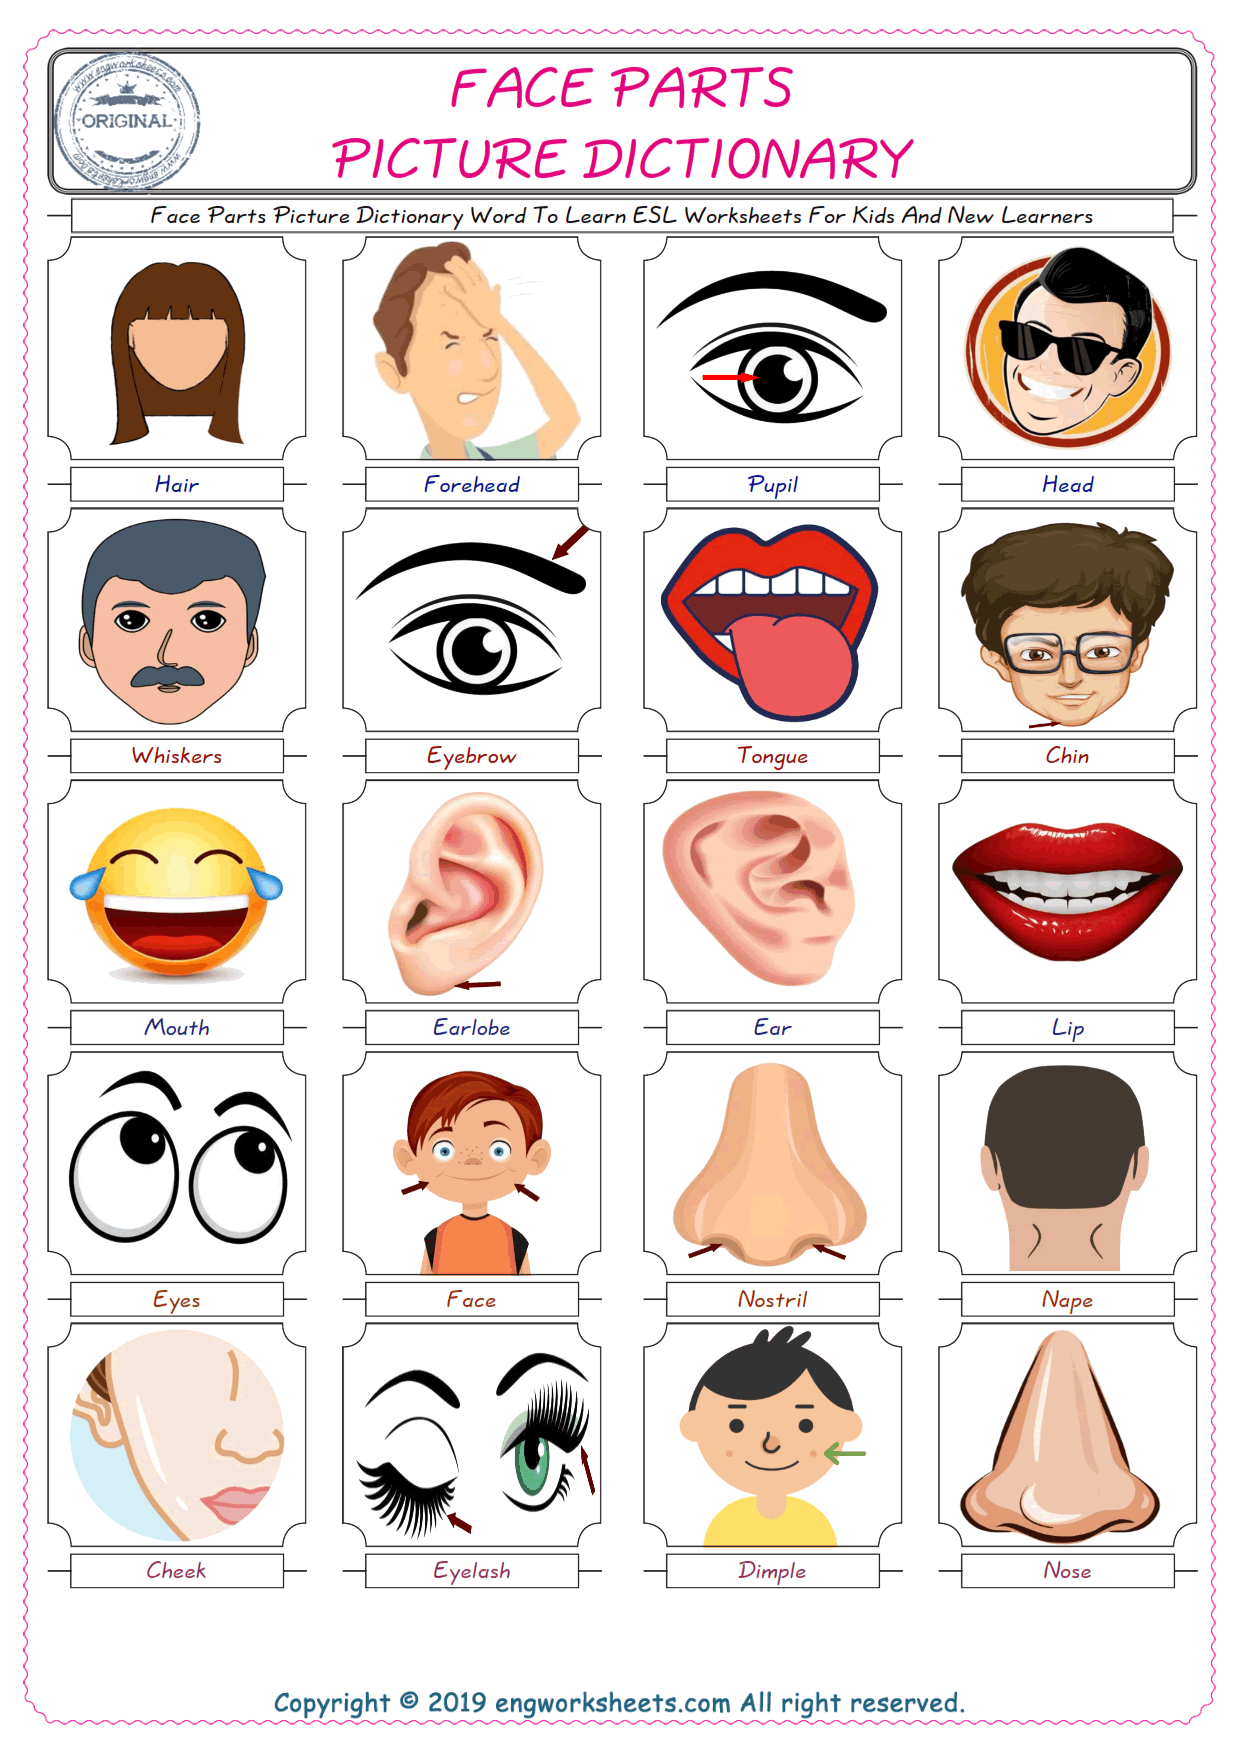  Face Parts English Worksheet for Kids ESL Printable Picture Dictionary 